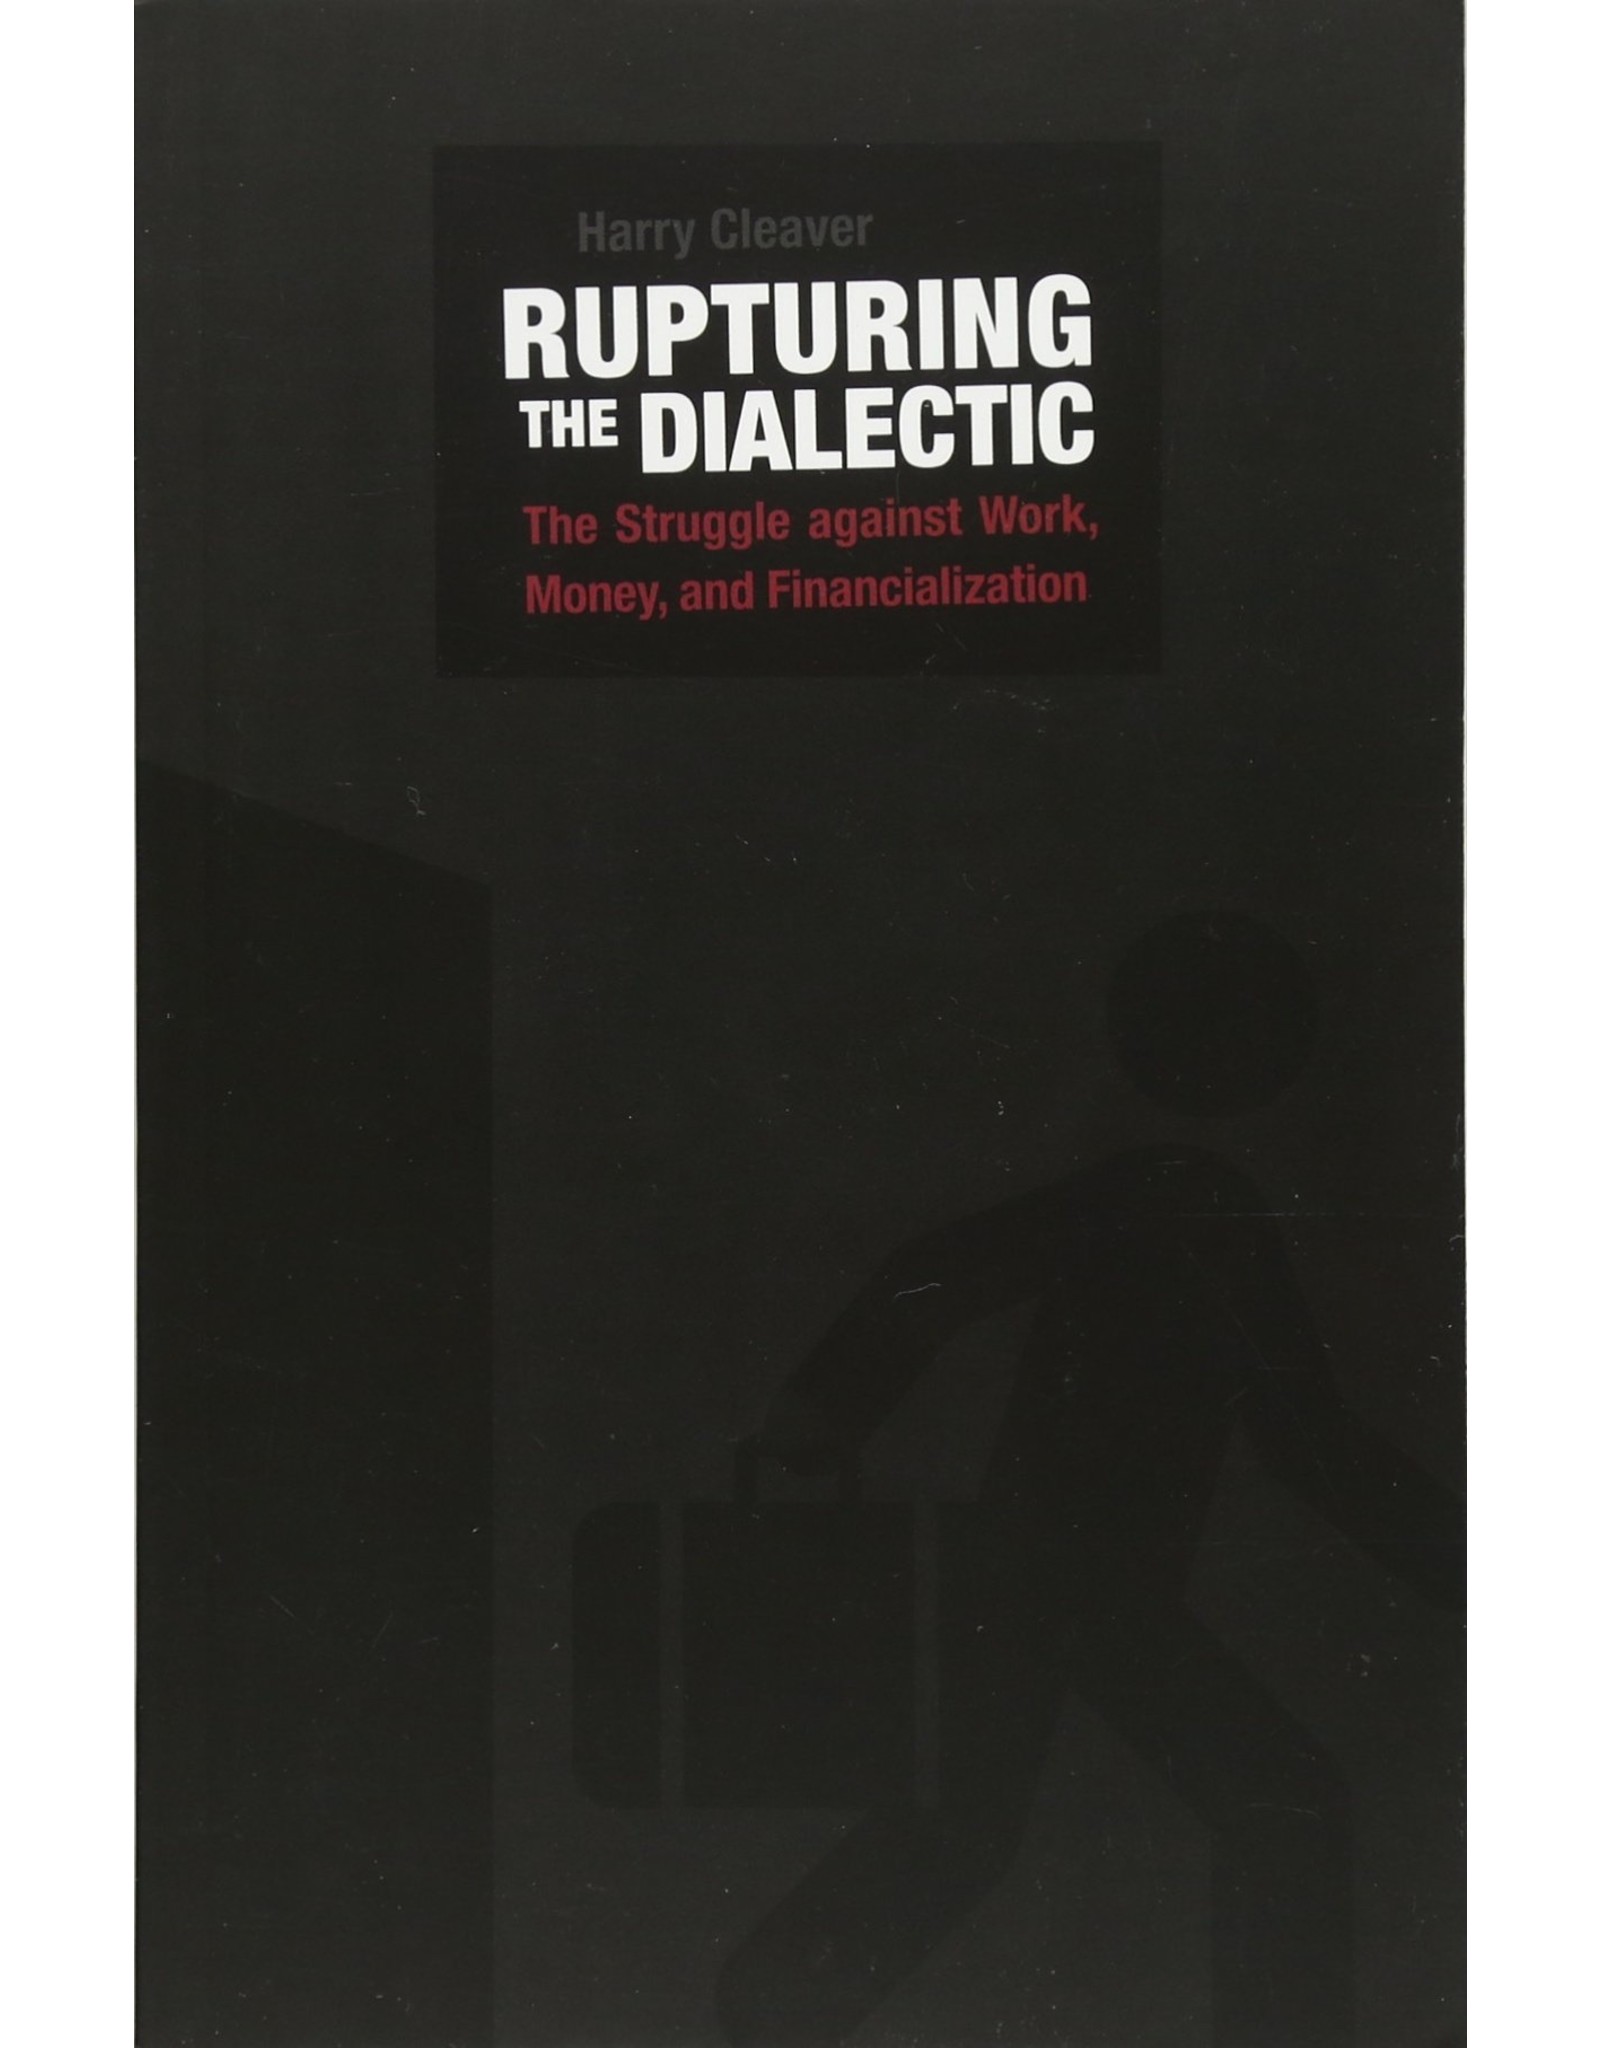 Literature Rupturing the Dialectic: The Struggle Against Work, Money, and Financialization